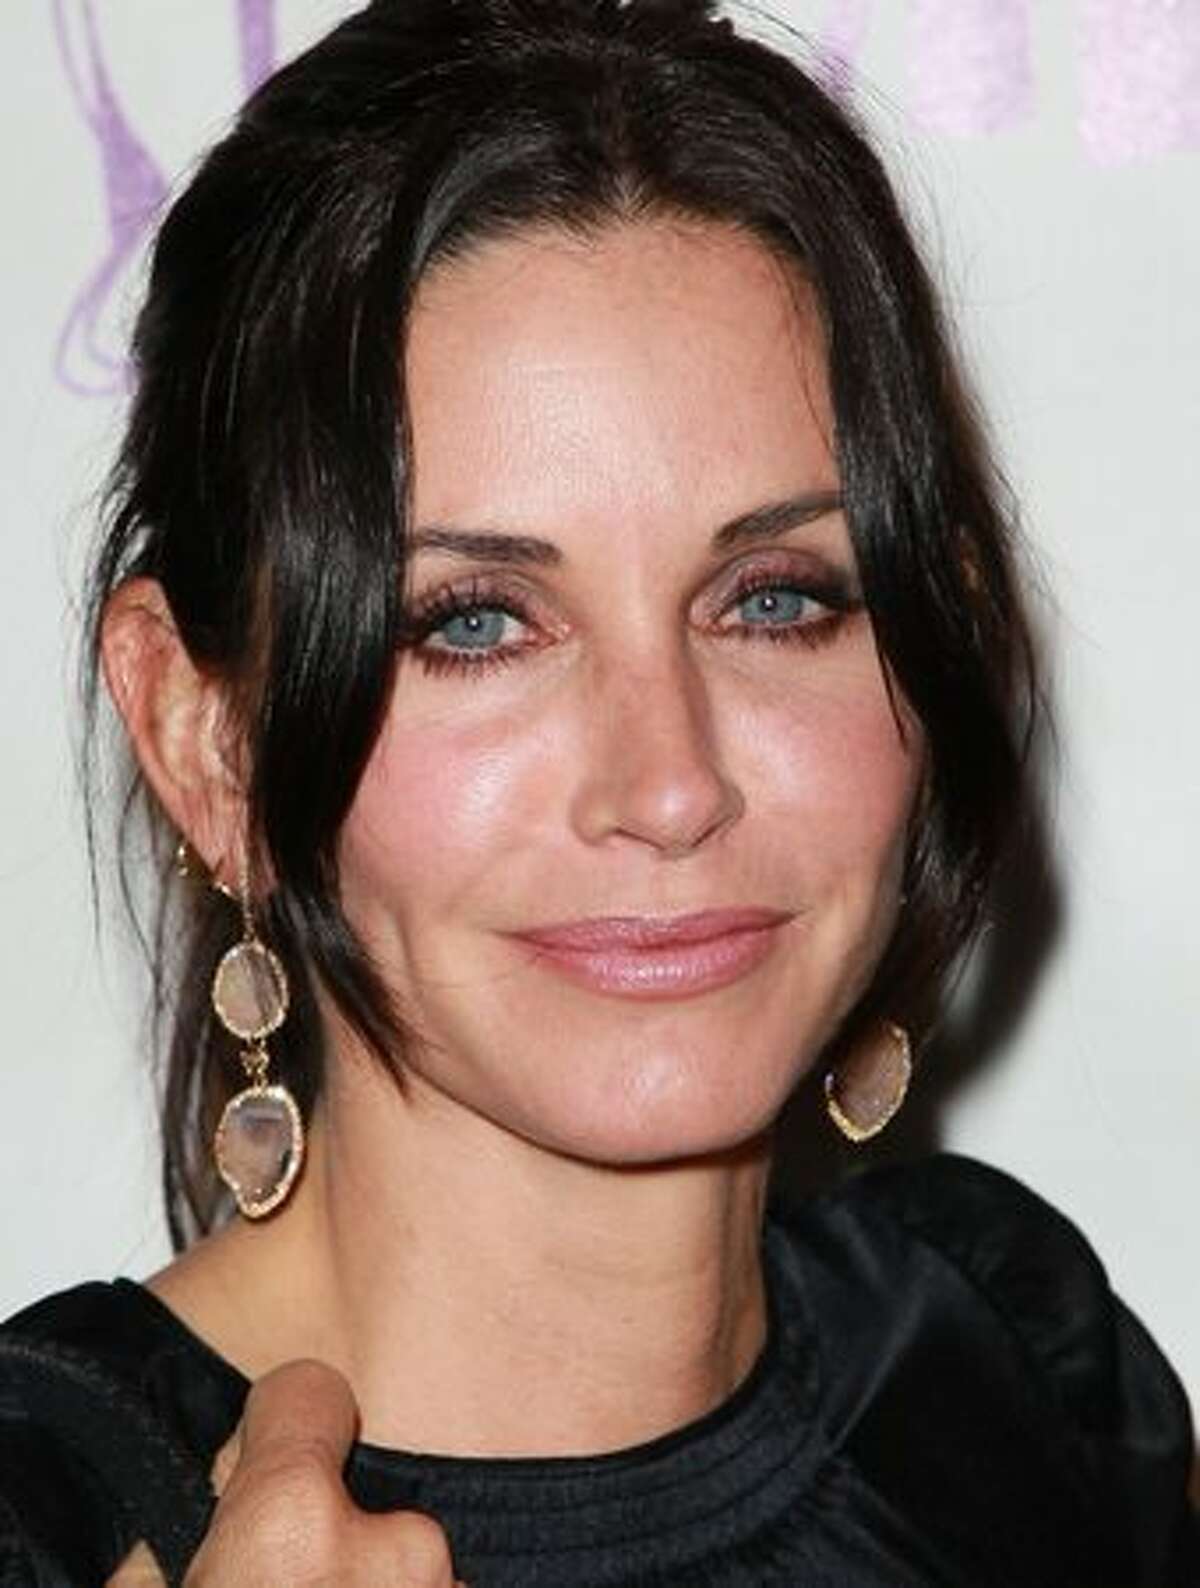 Actress Courteney Cox attends the 15th Annual Los Angeles Antique Show Opening Night Preview Party benefiting P.S. ARTS at Barker Hanger on April 21, 2010 in Santa Monica, California.